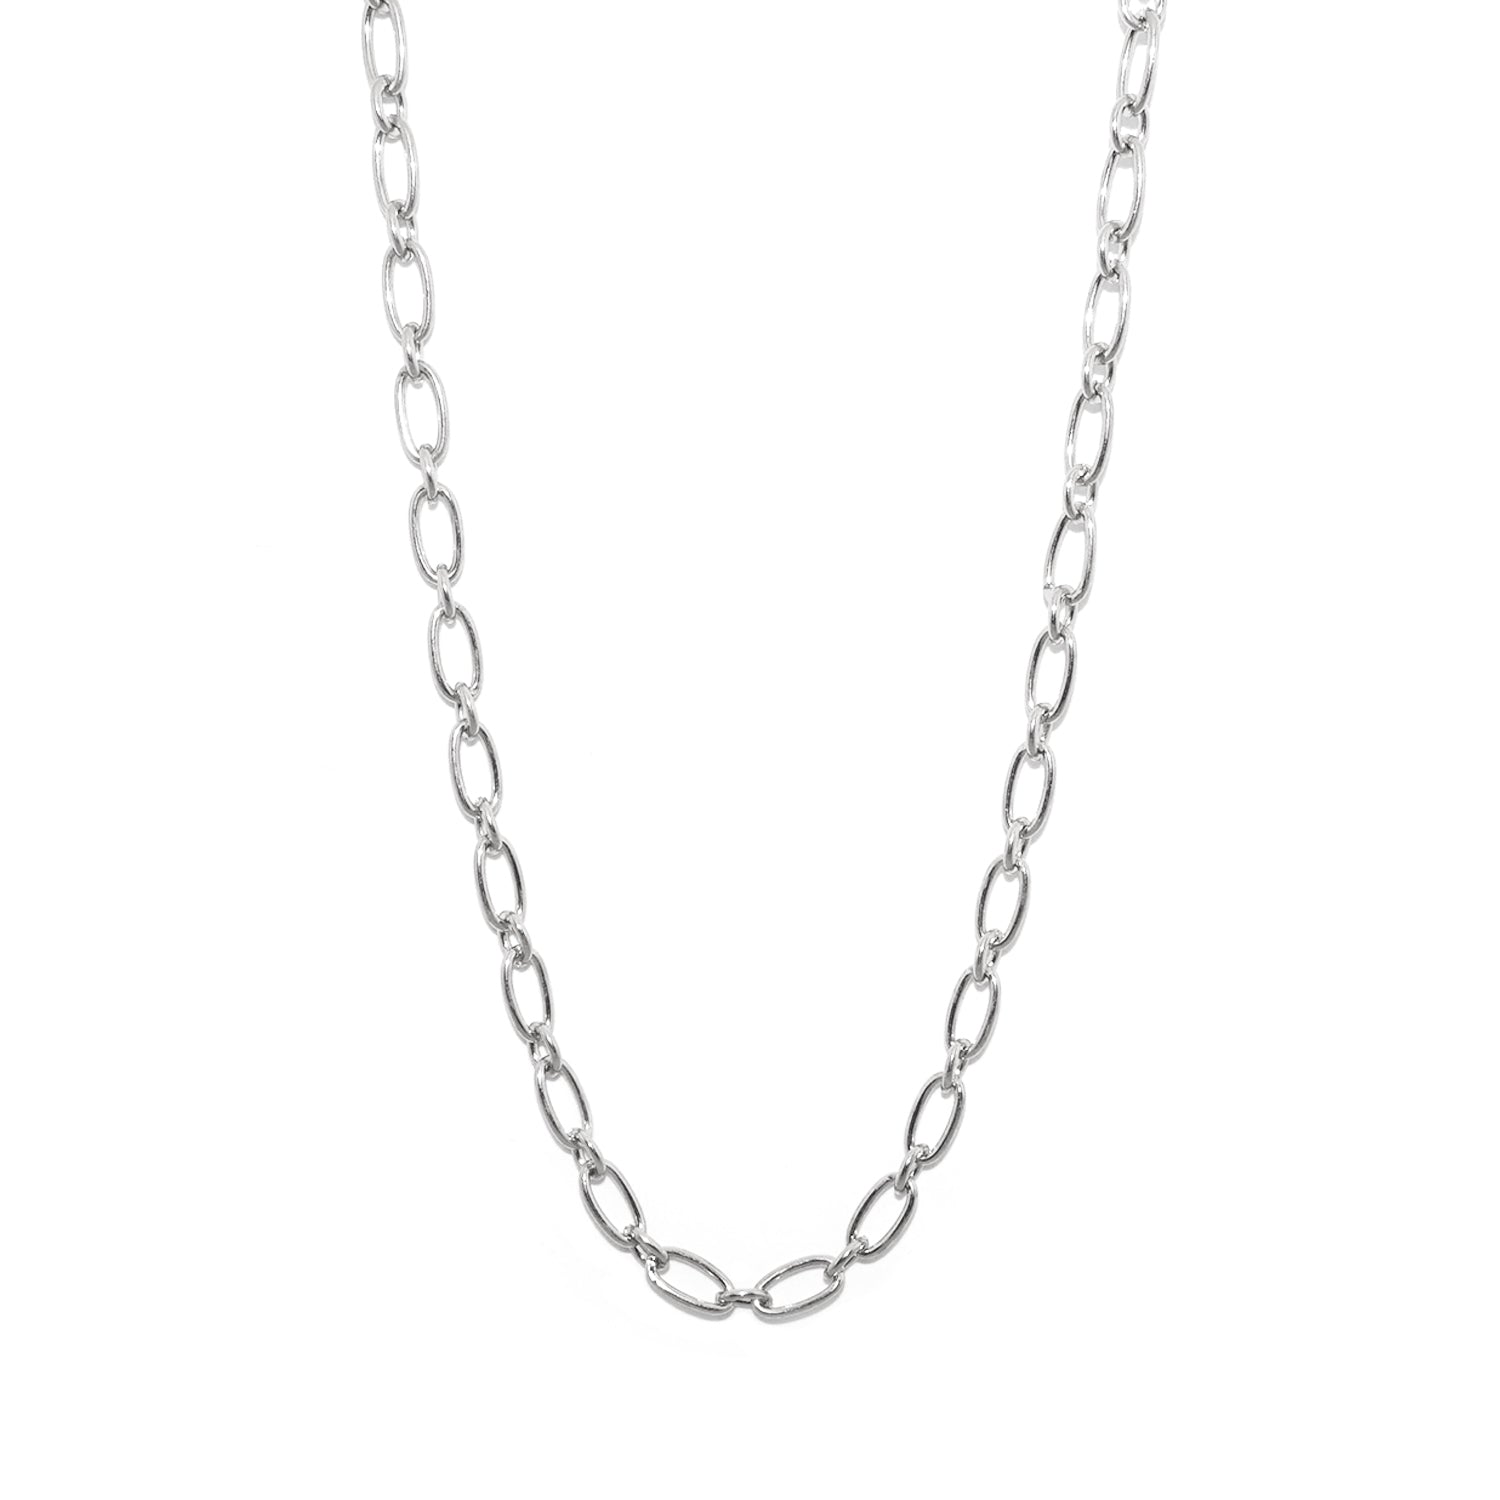 16" chain necklace for clasp charms